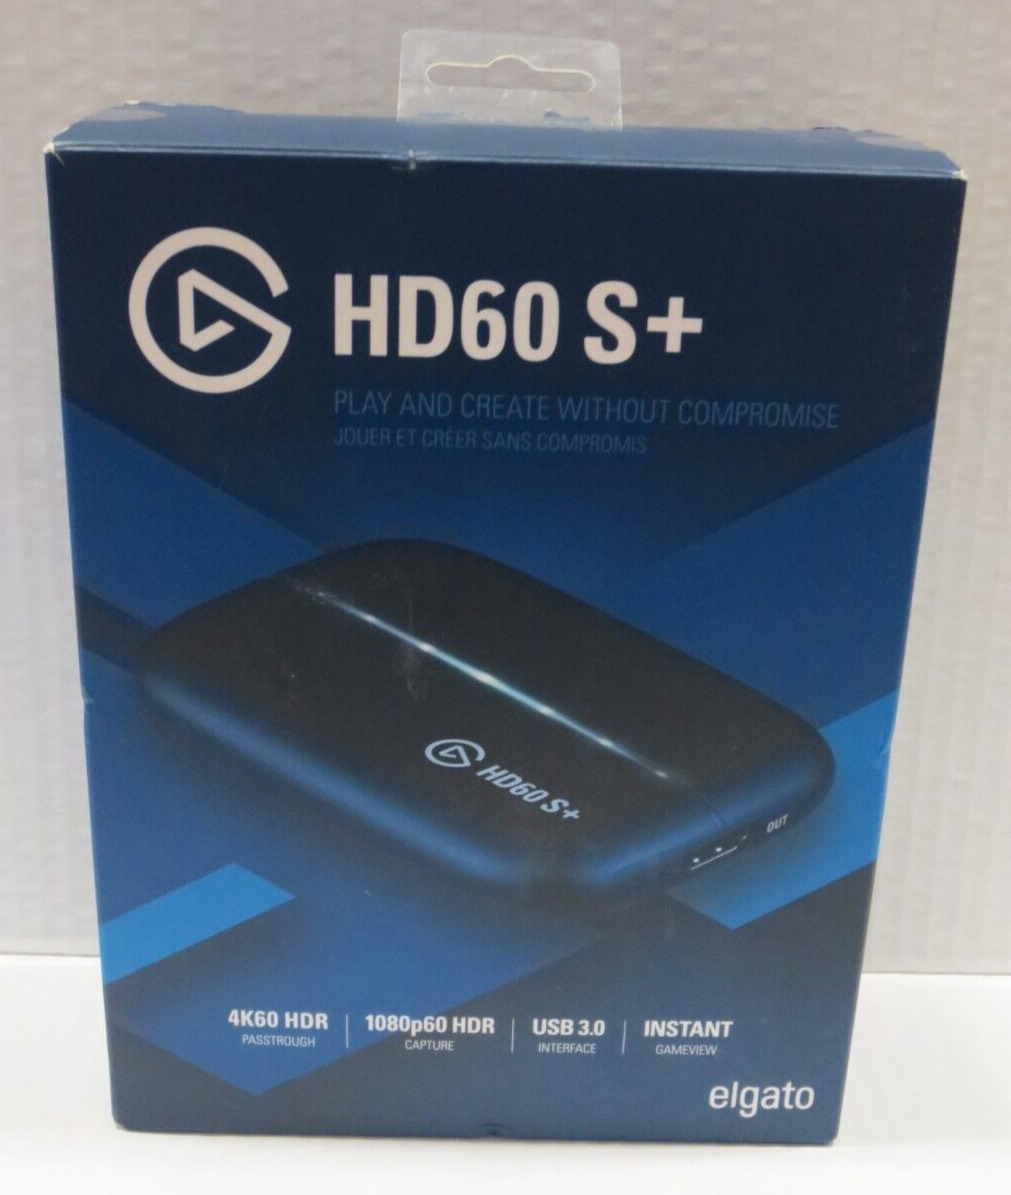 ELGATO GAME CAPTURE HD60 S+ PLAY AND CREATE WITHOUT COMPROMISE BOXED